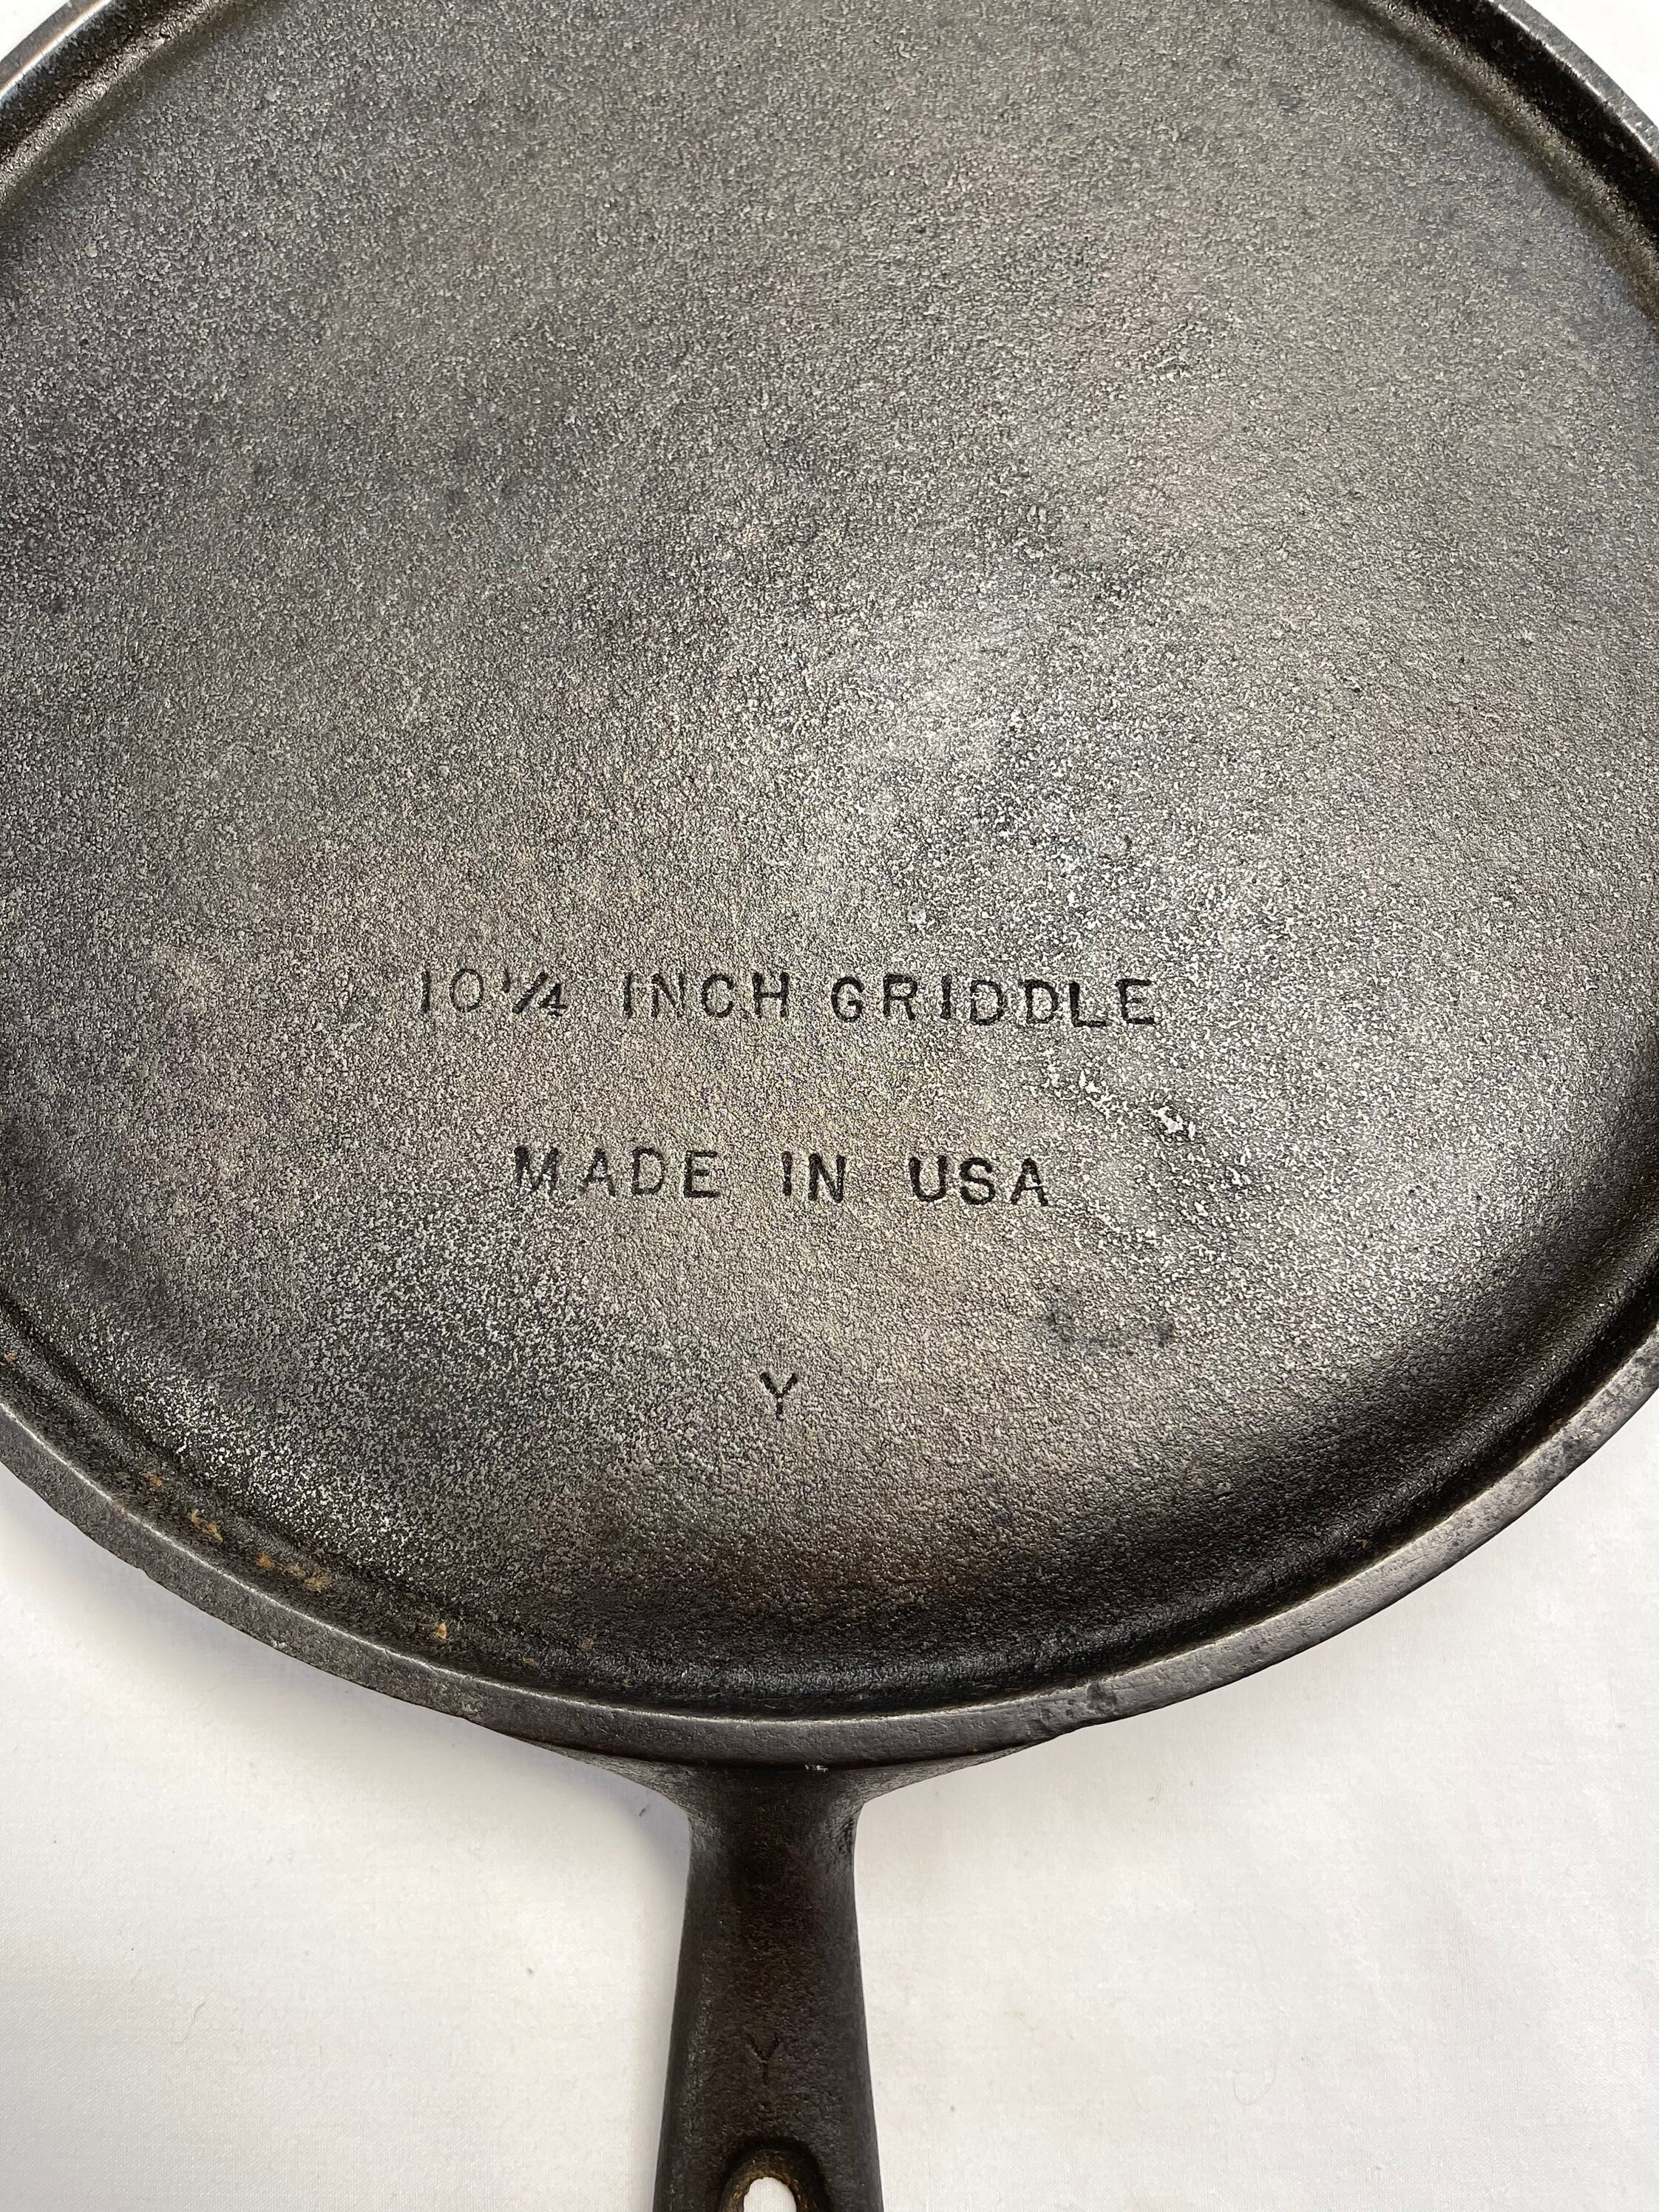 Unmarked Cast Iron #9 Griddle. Marked 9 on Handle. Electrolysis Cleaned and  Seasoned. Free Shipping in U.S.A. 85 Dollars.